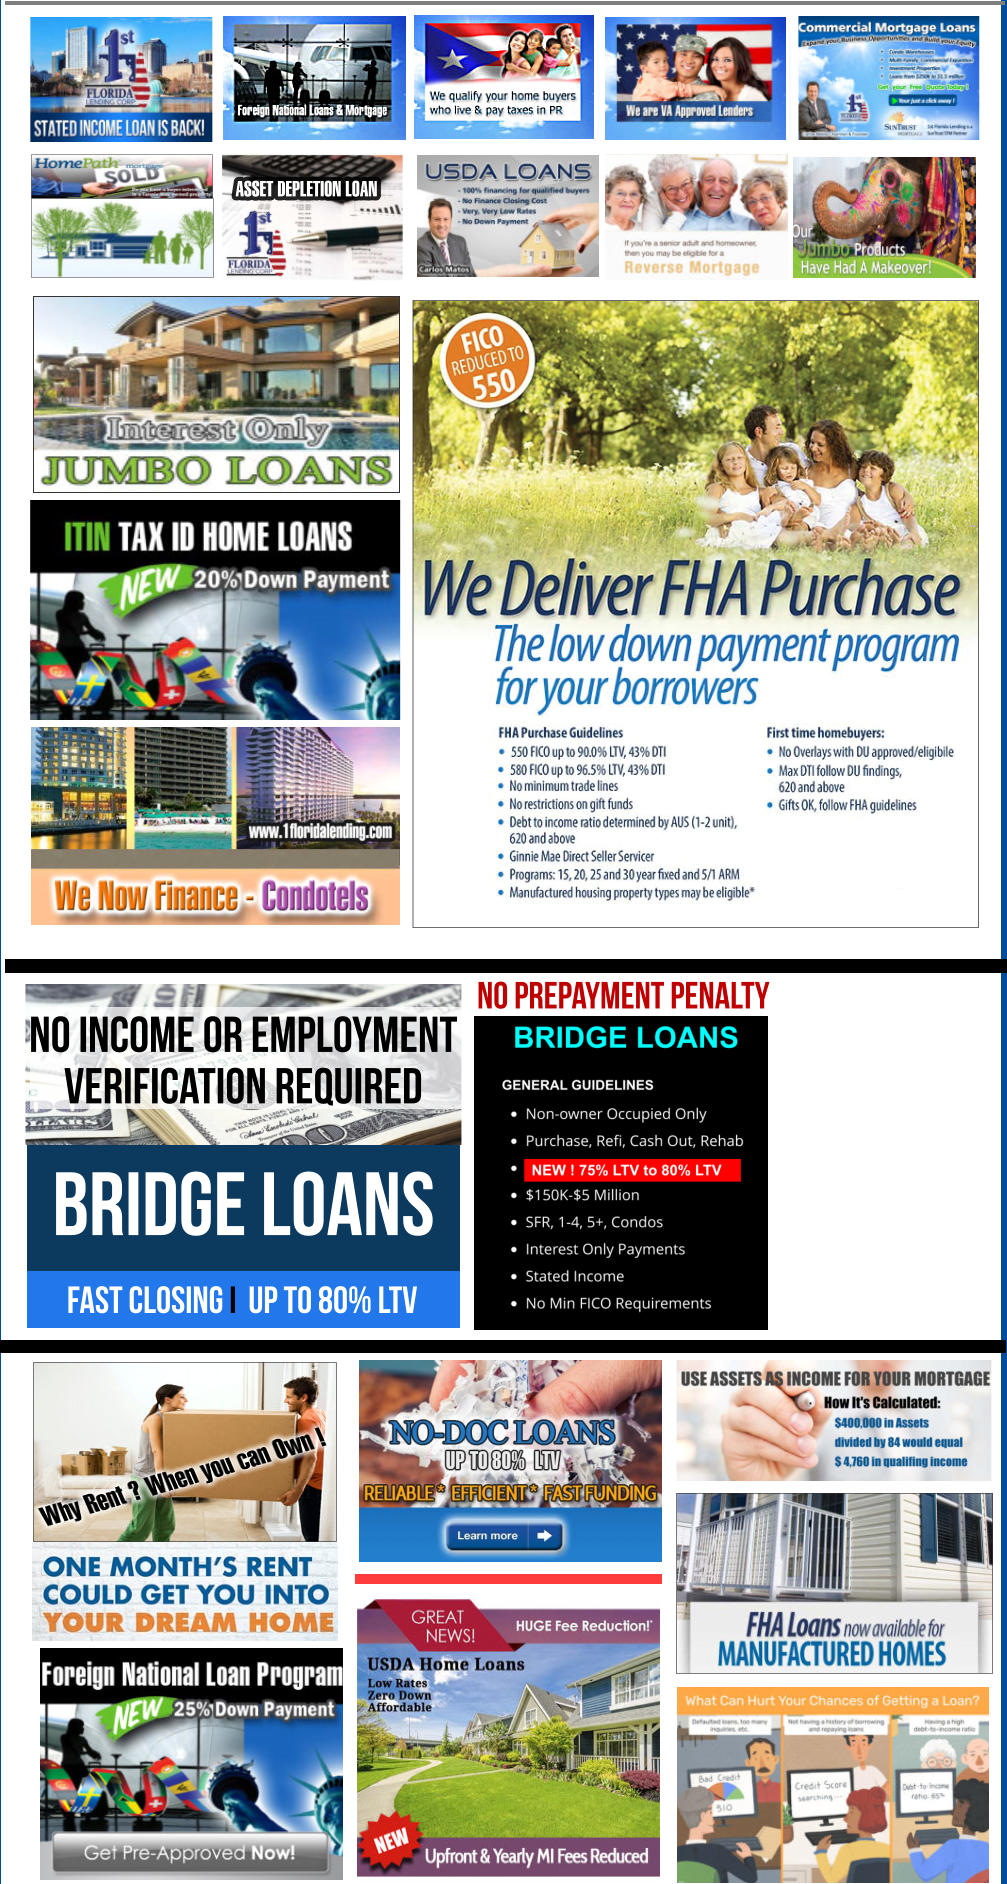 ASSET DEPLETION LOAN FAST CLOSING i  UP TO 80% LTV BRIDGE LOANS no income OR EMPLOYMENT  VERiFICATION required   no prepayment penalty